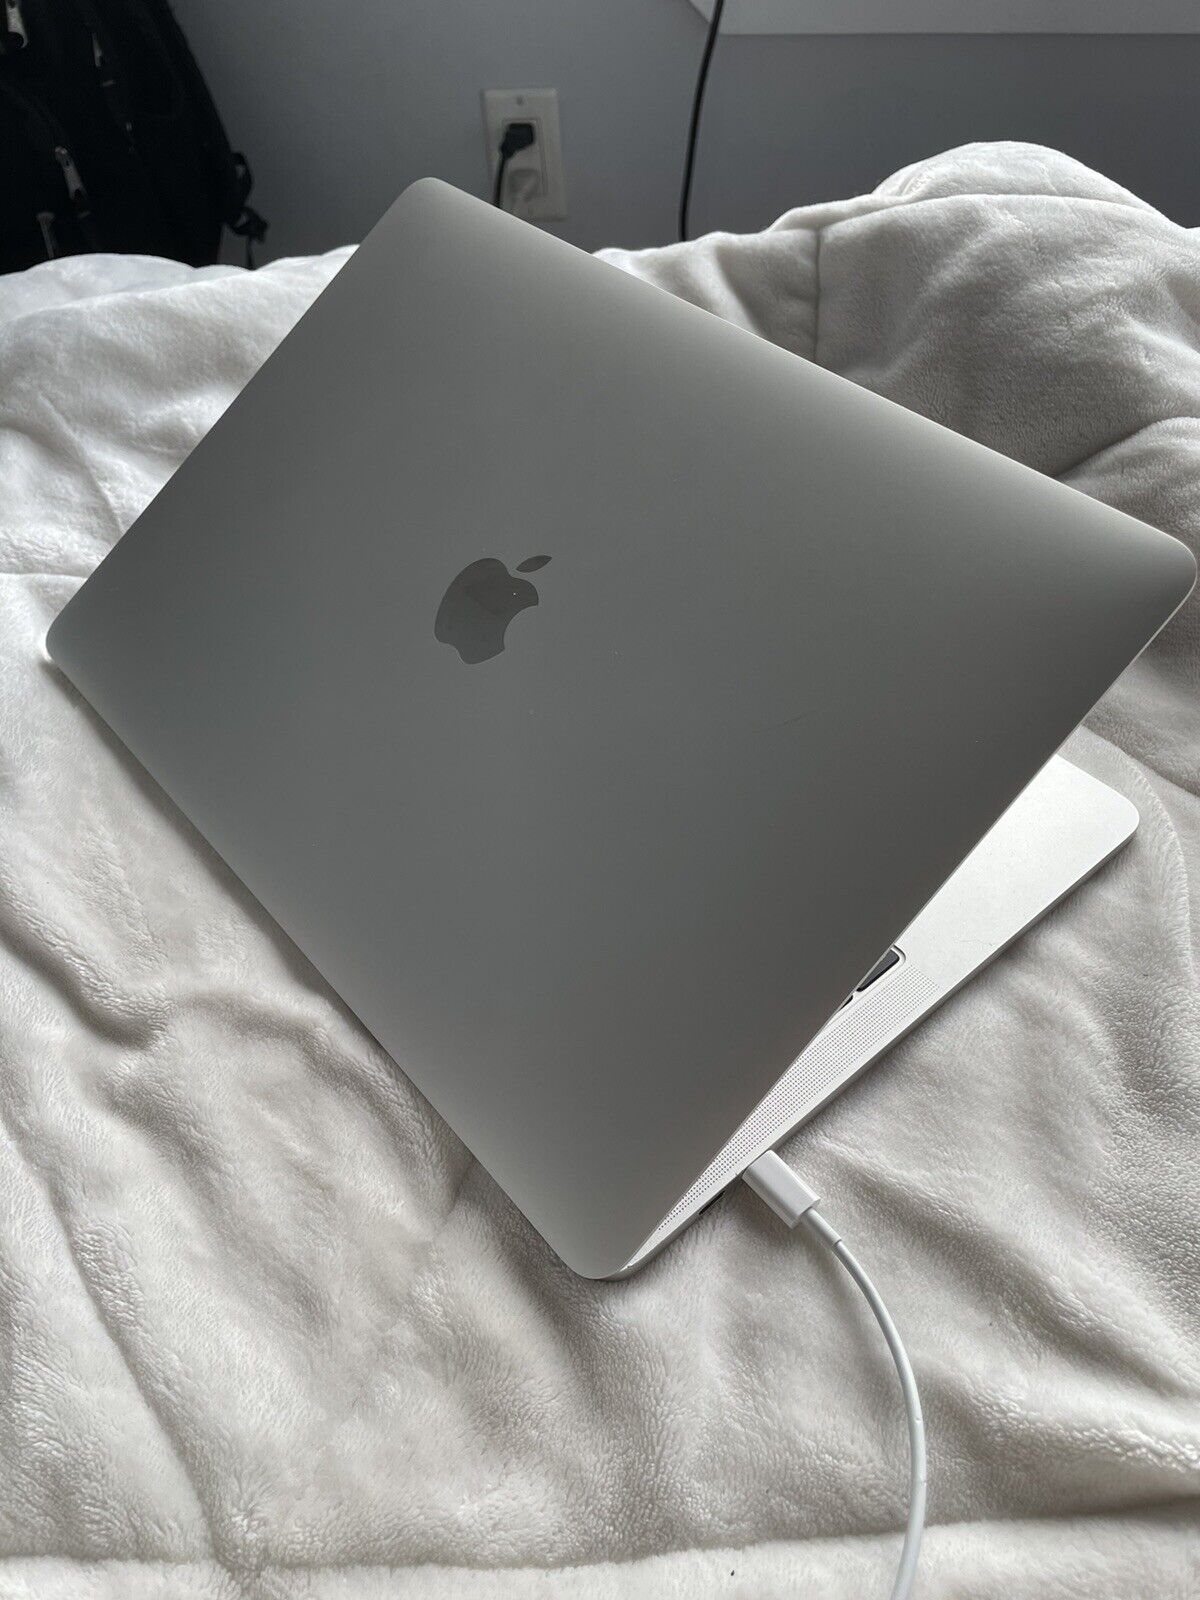 Macbook Pro 2019 13 inch With Touch Bar - Silver | eBay